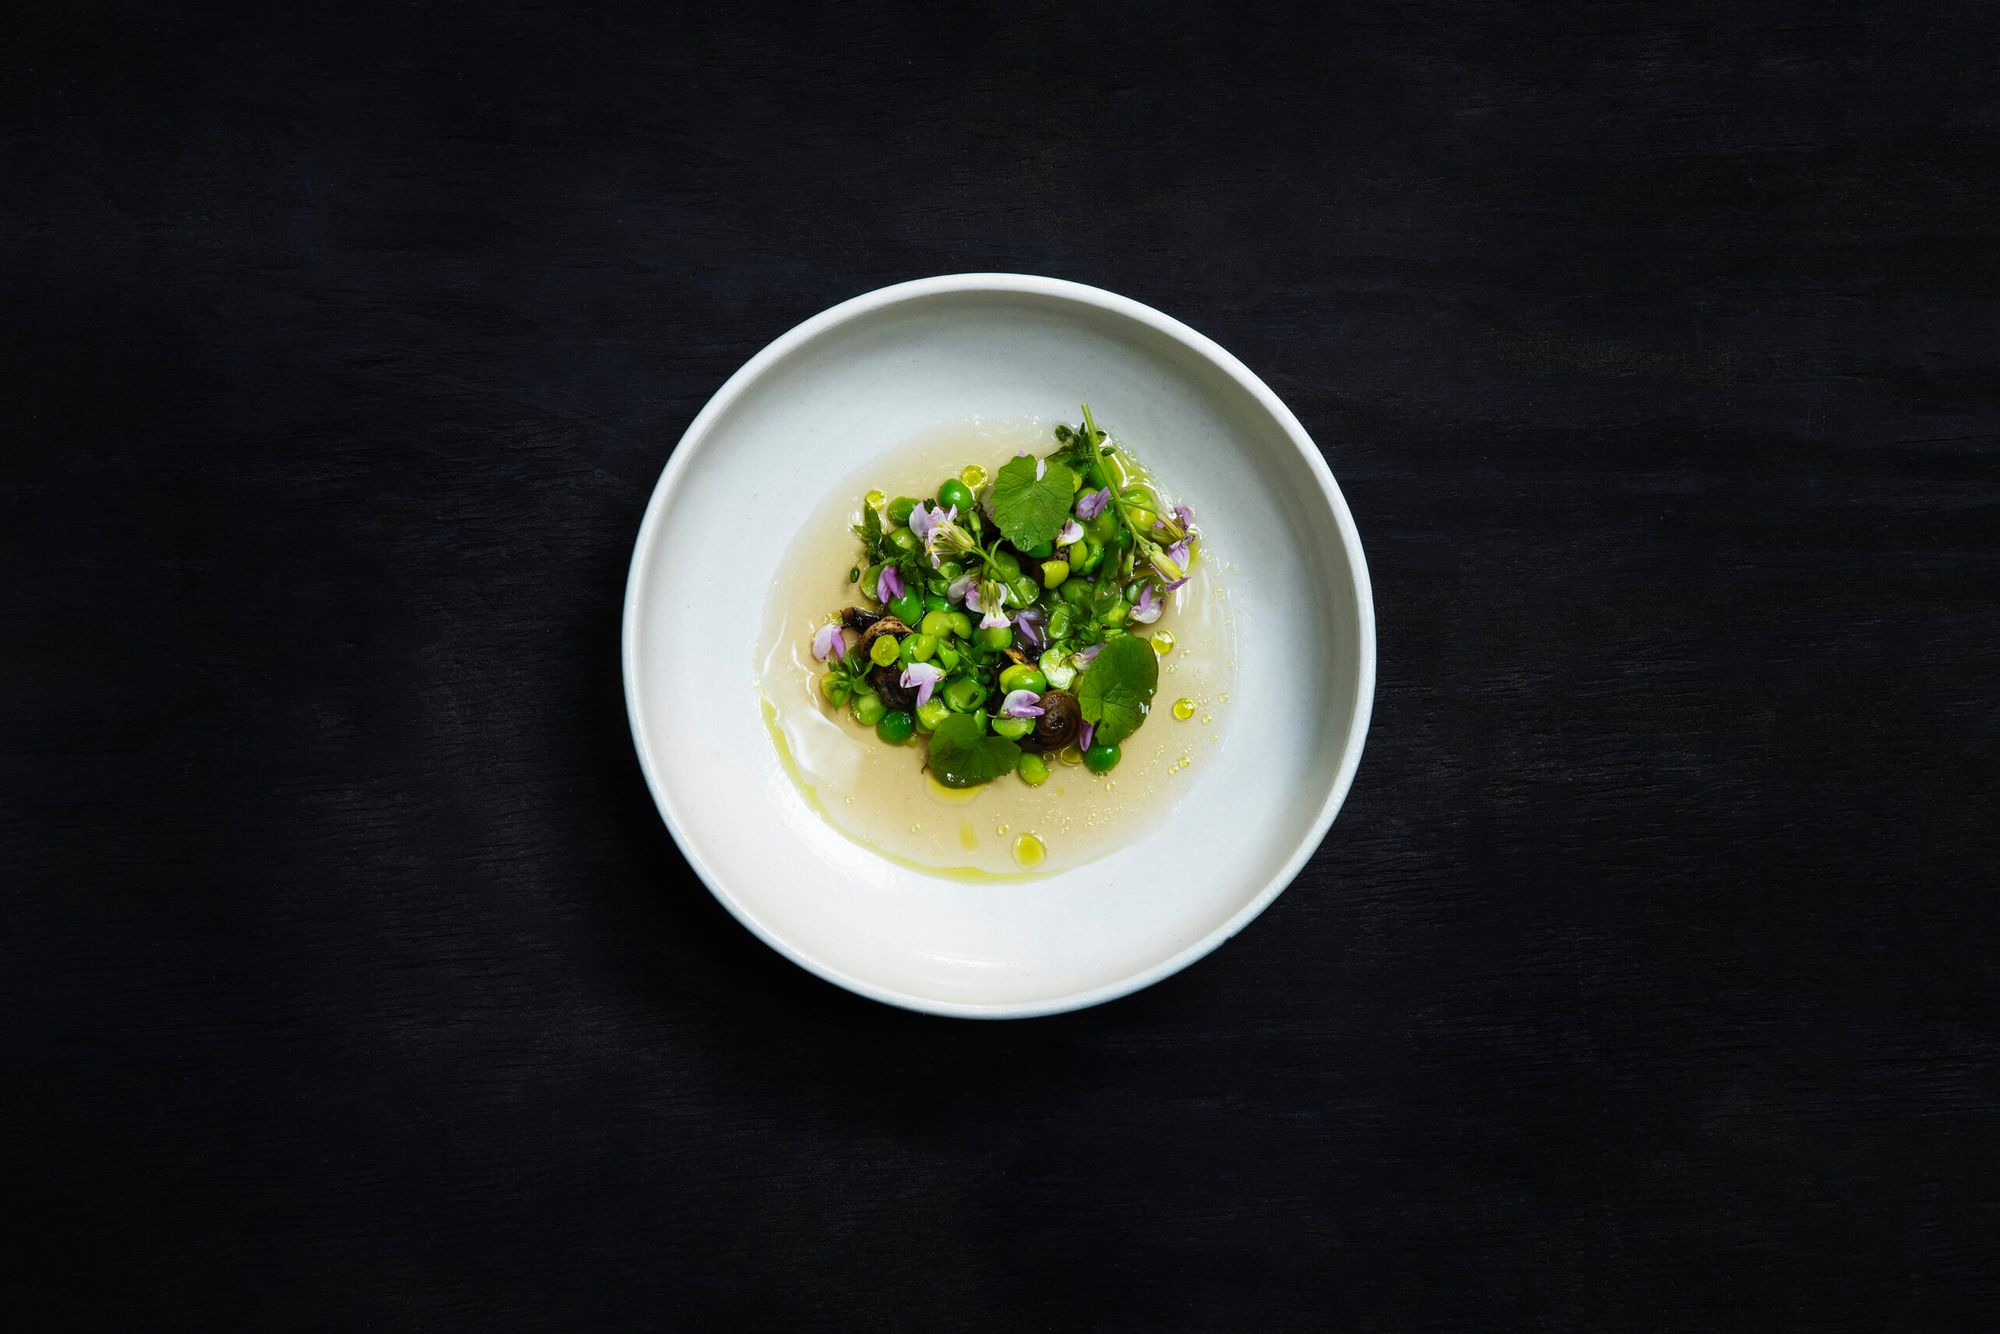 A plate of peas and razor clams on a black background